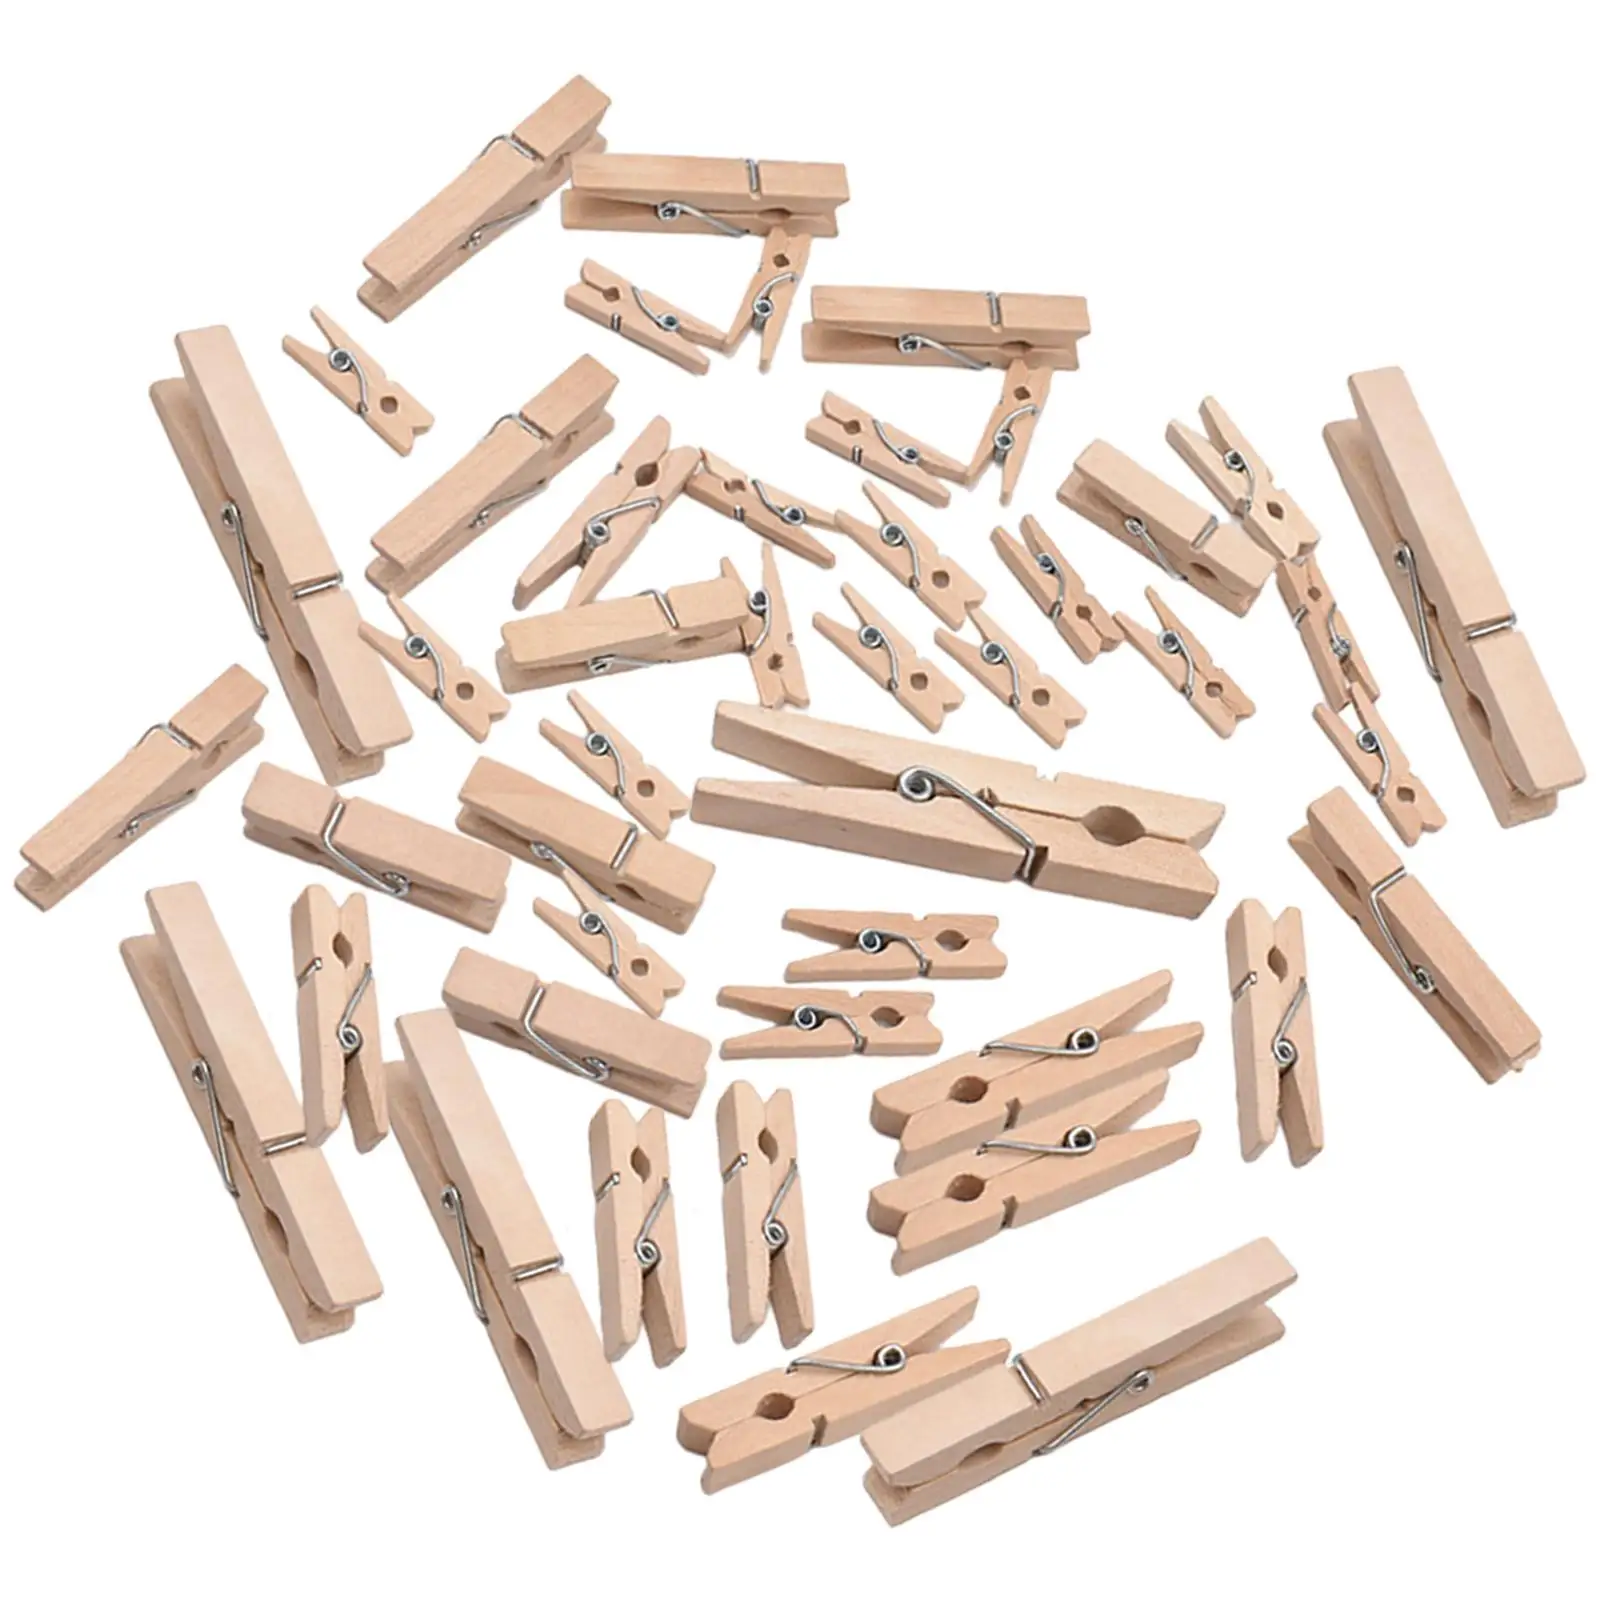 150x Mini Natural Wooden Clothespins, DIY Crafts Decorative Photo Wall Wall Hanging Pictures Photo Paper Pegs for Hanging Photos